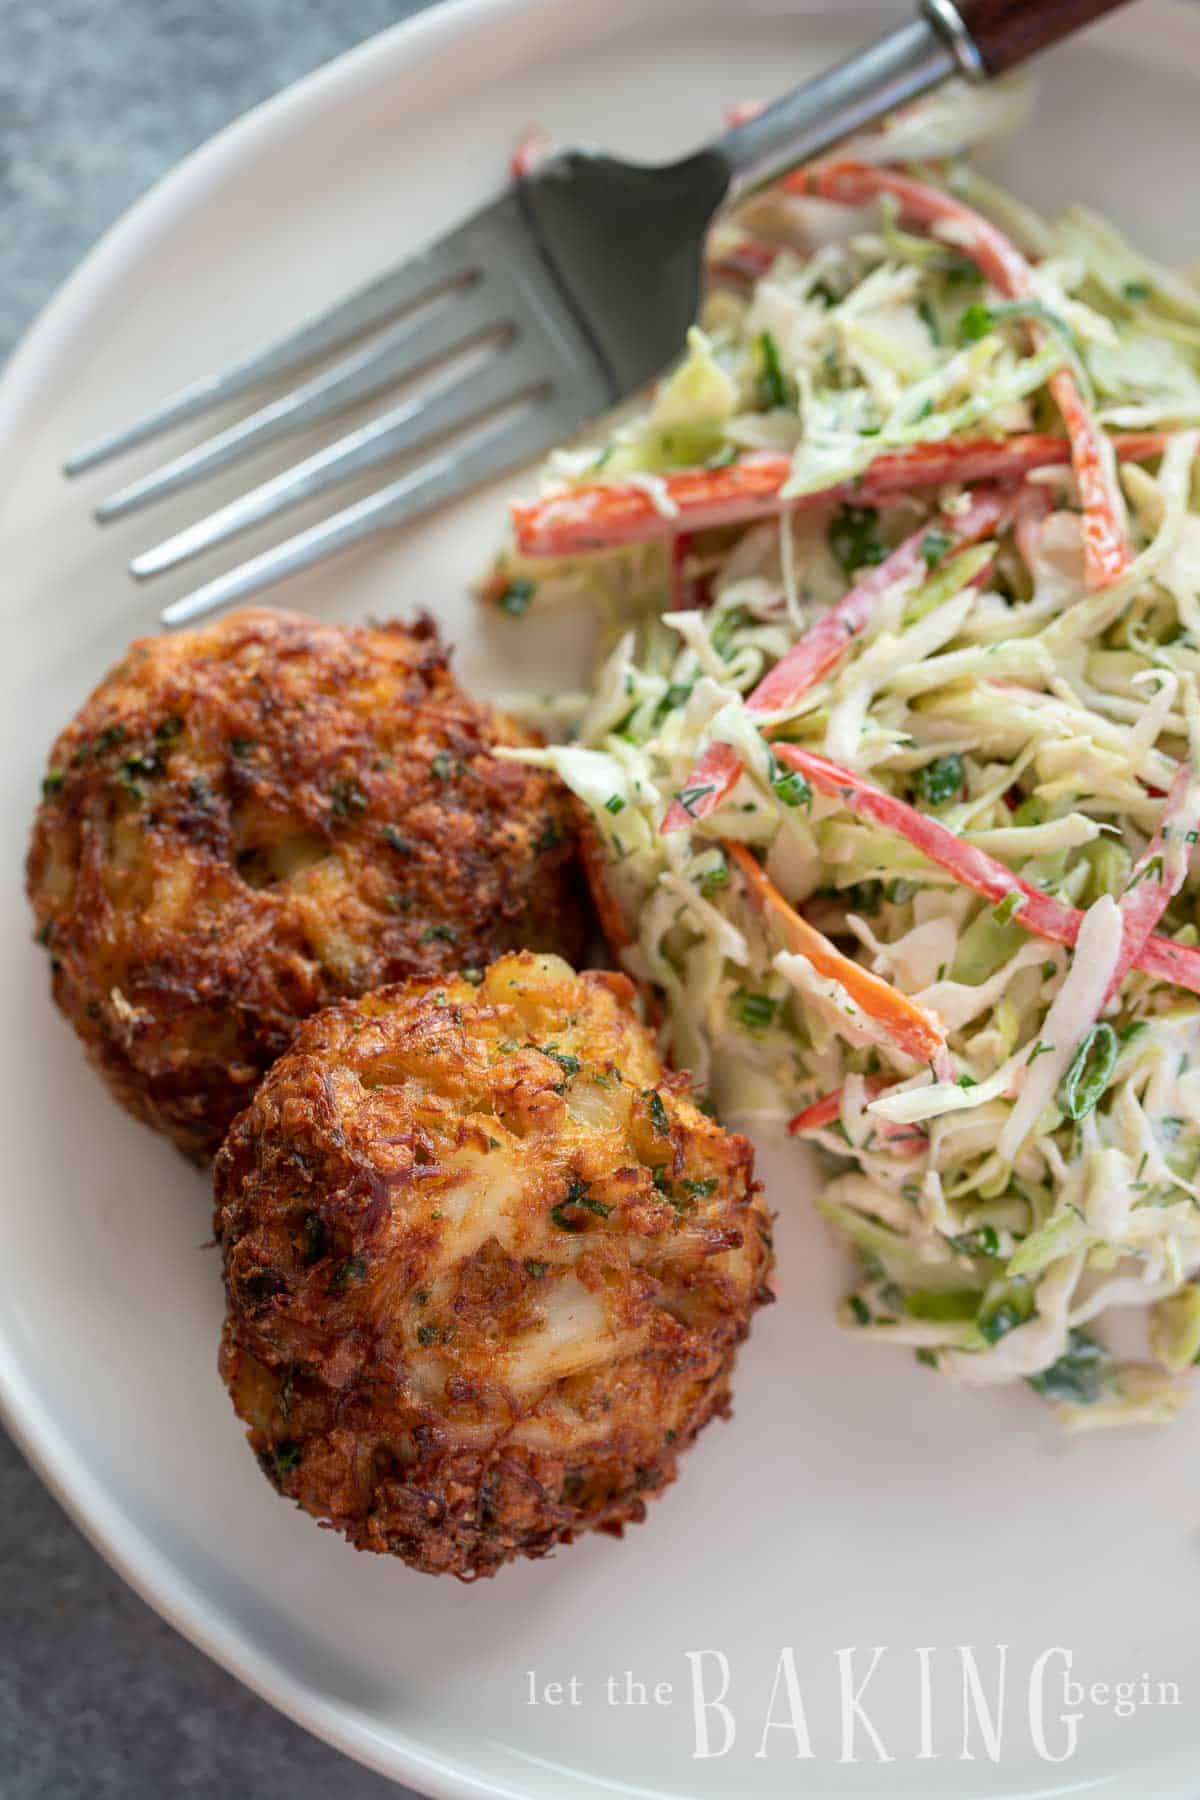 Crab cake recipe made on a plate with coleslaw on the side.